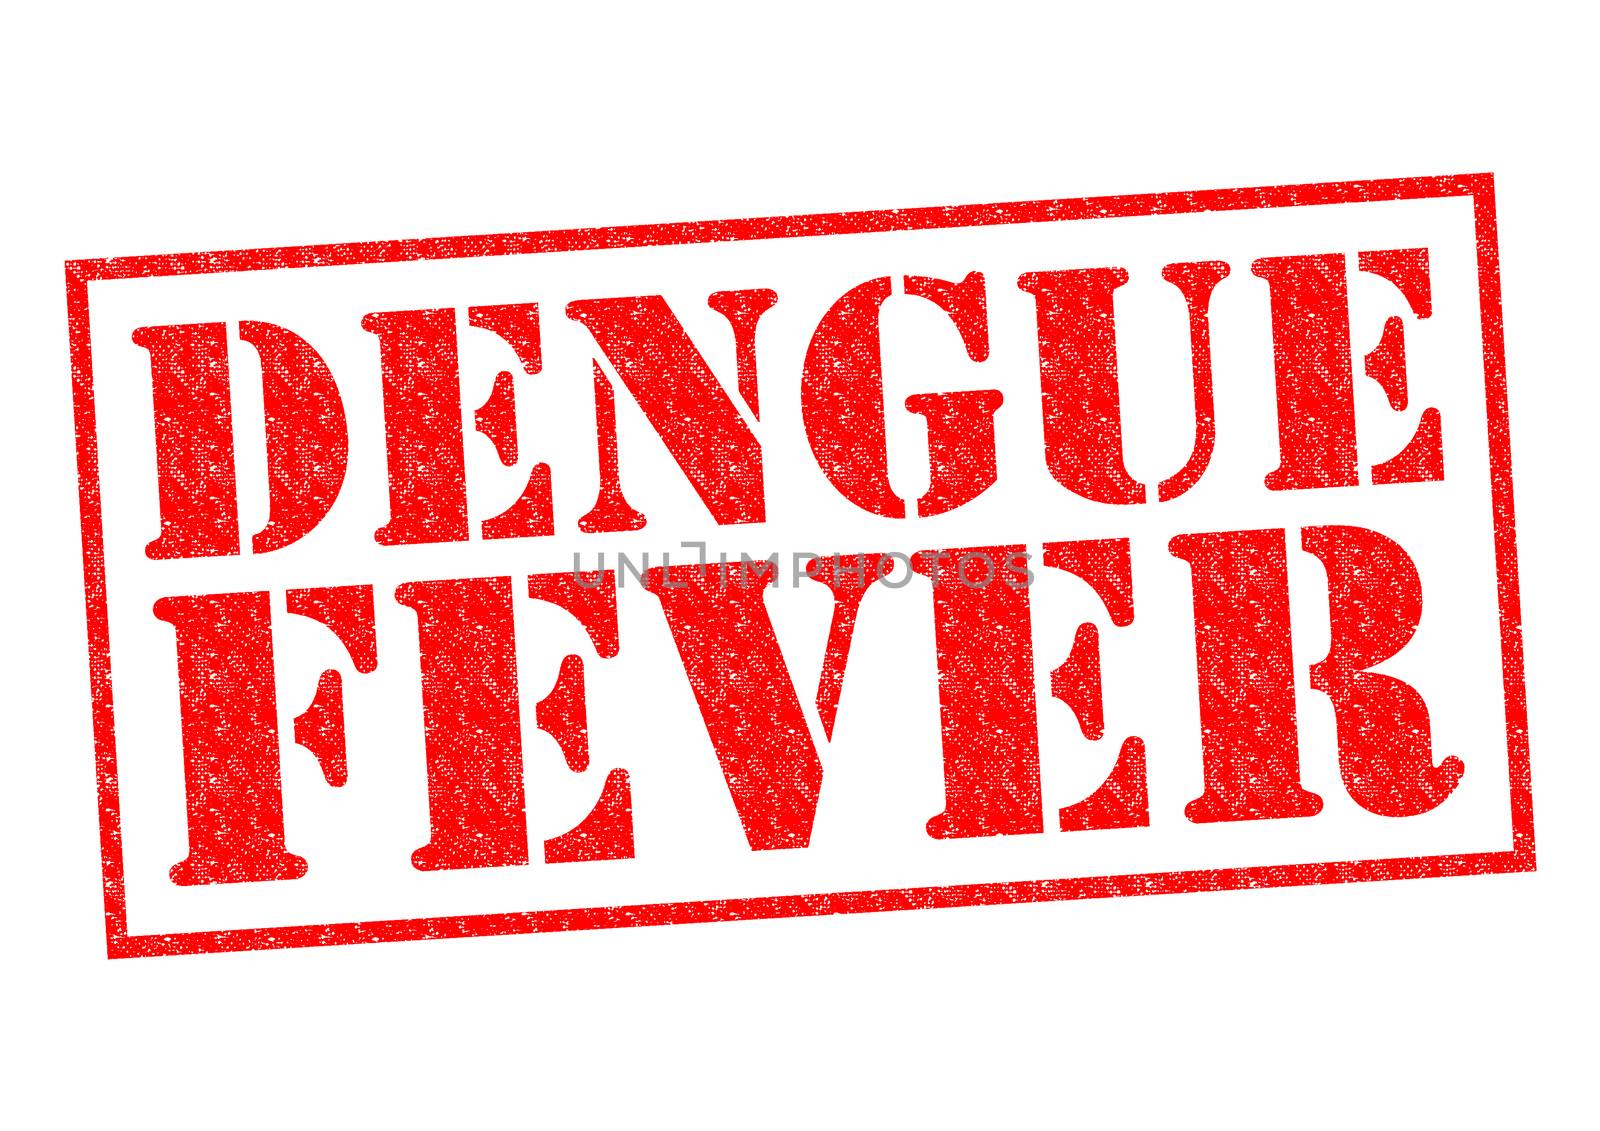 DENGUE FEVER red Rubber Stamp over a white background.